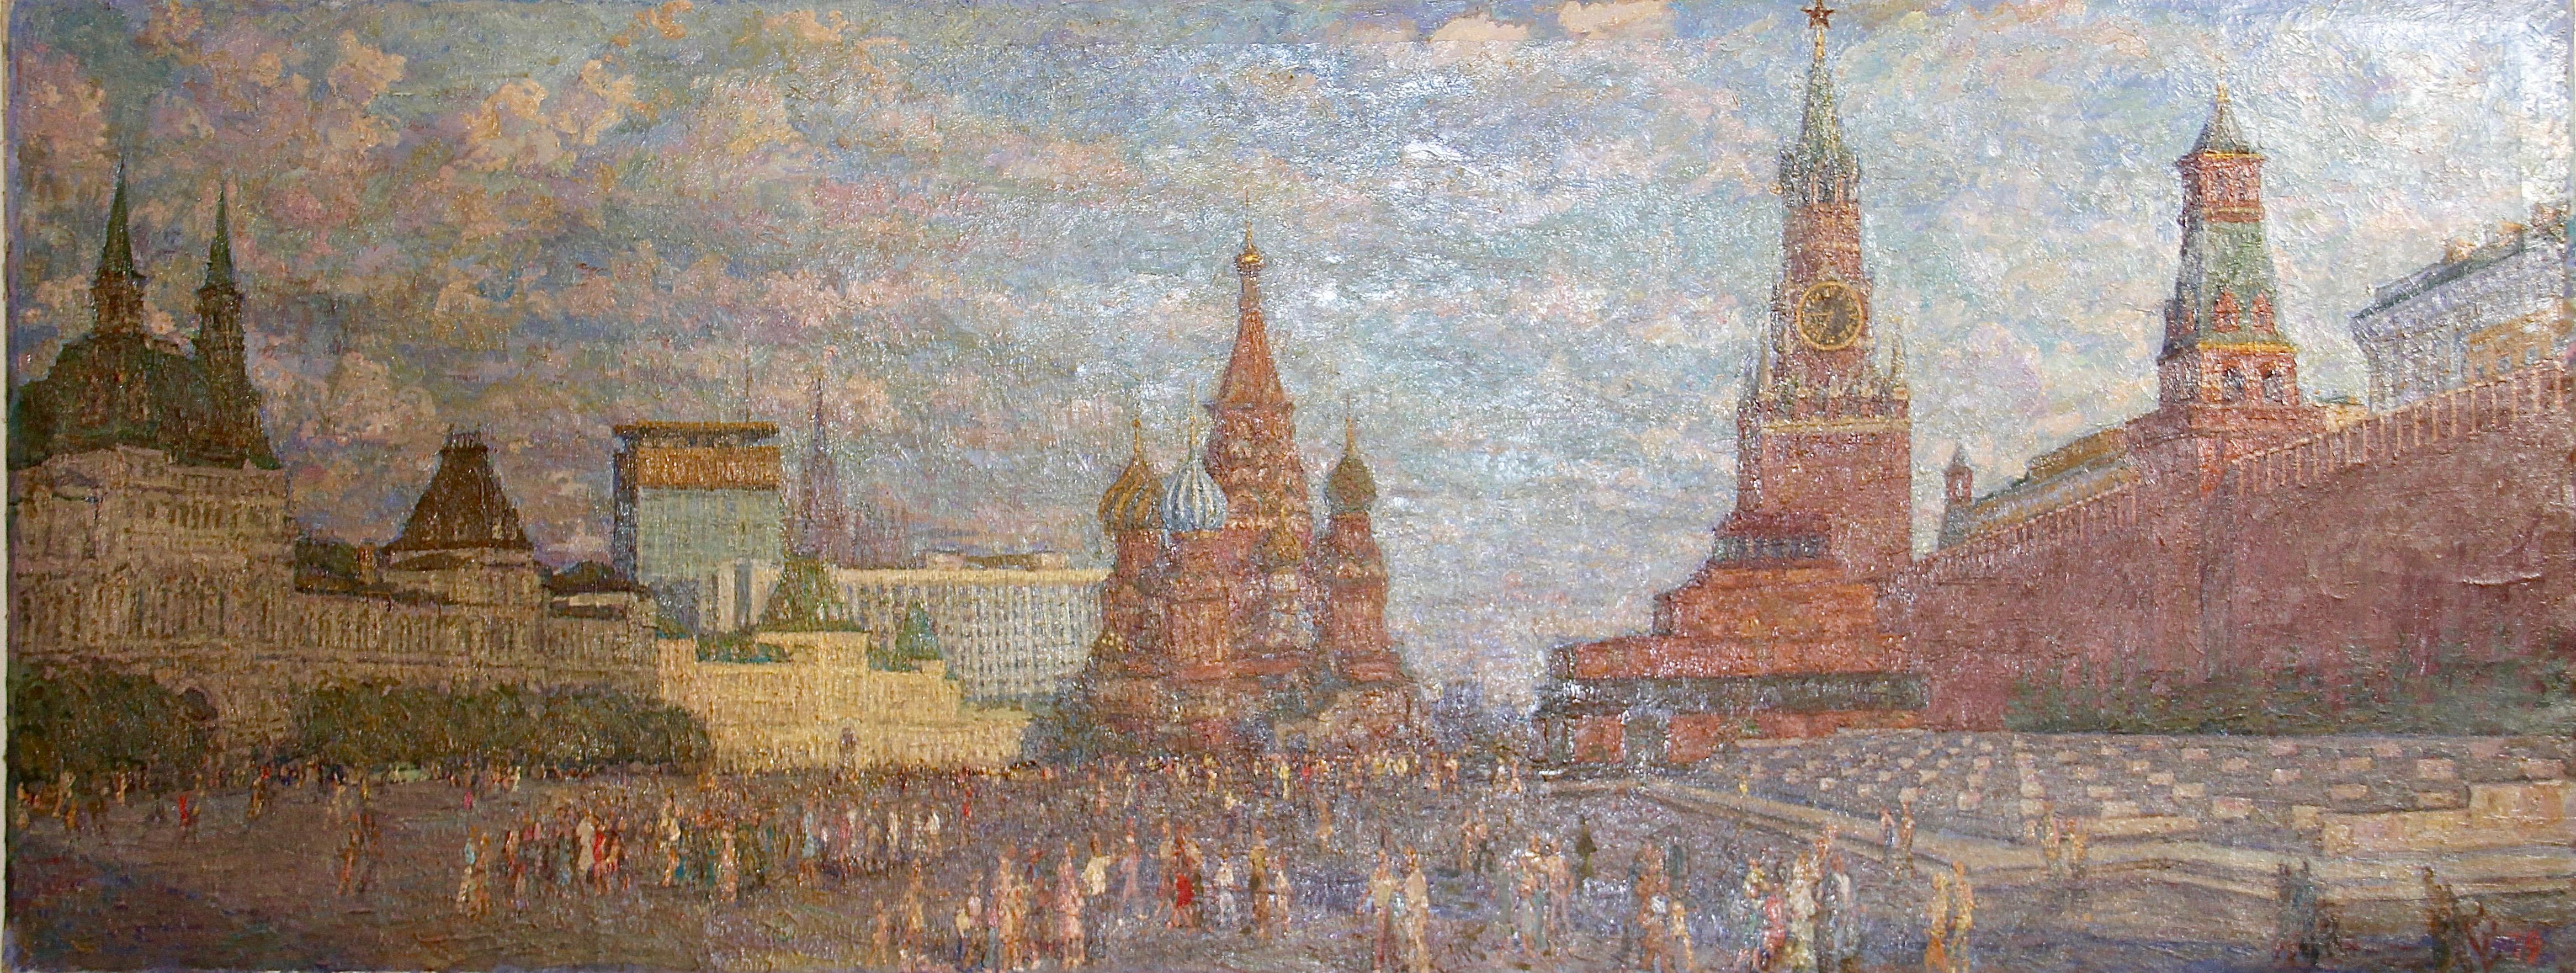 Solovykh Gennady Ivanovich Figurative Painting - Moscow. "On the red square". Kremlin, St. Basil's Cathedral. Russian soviet art.